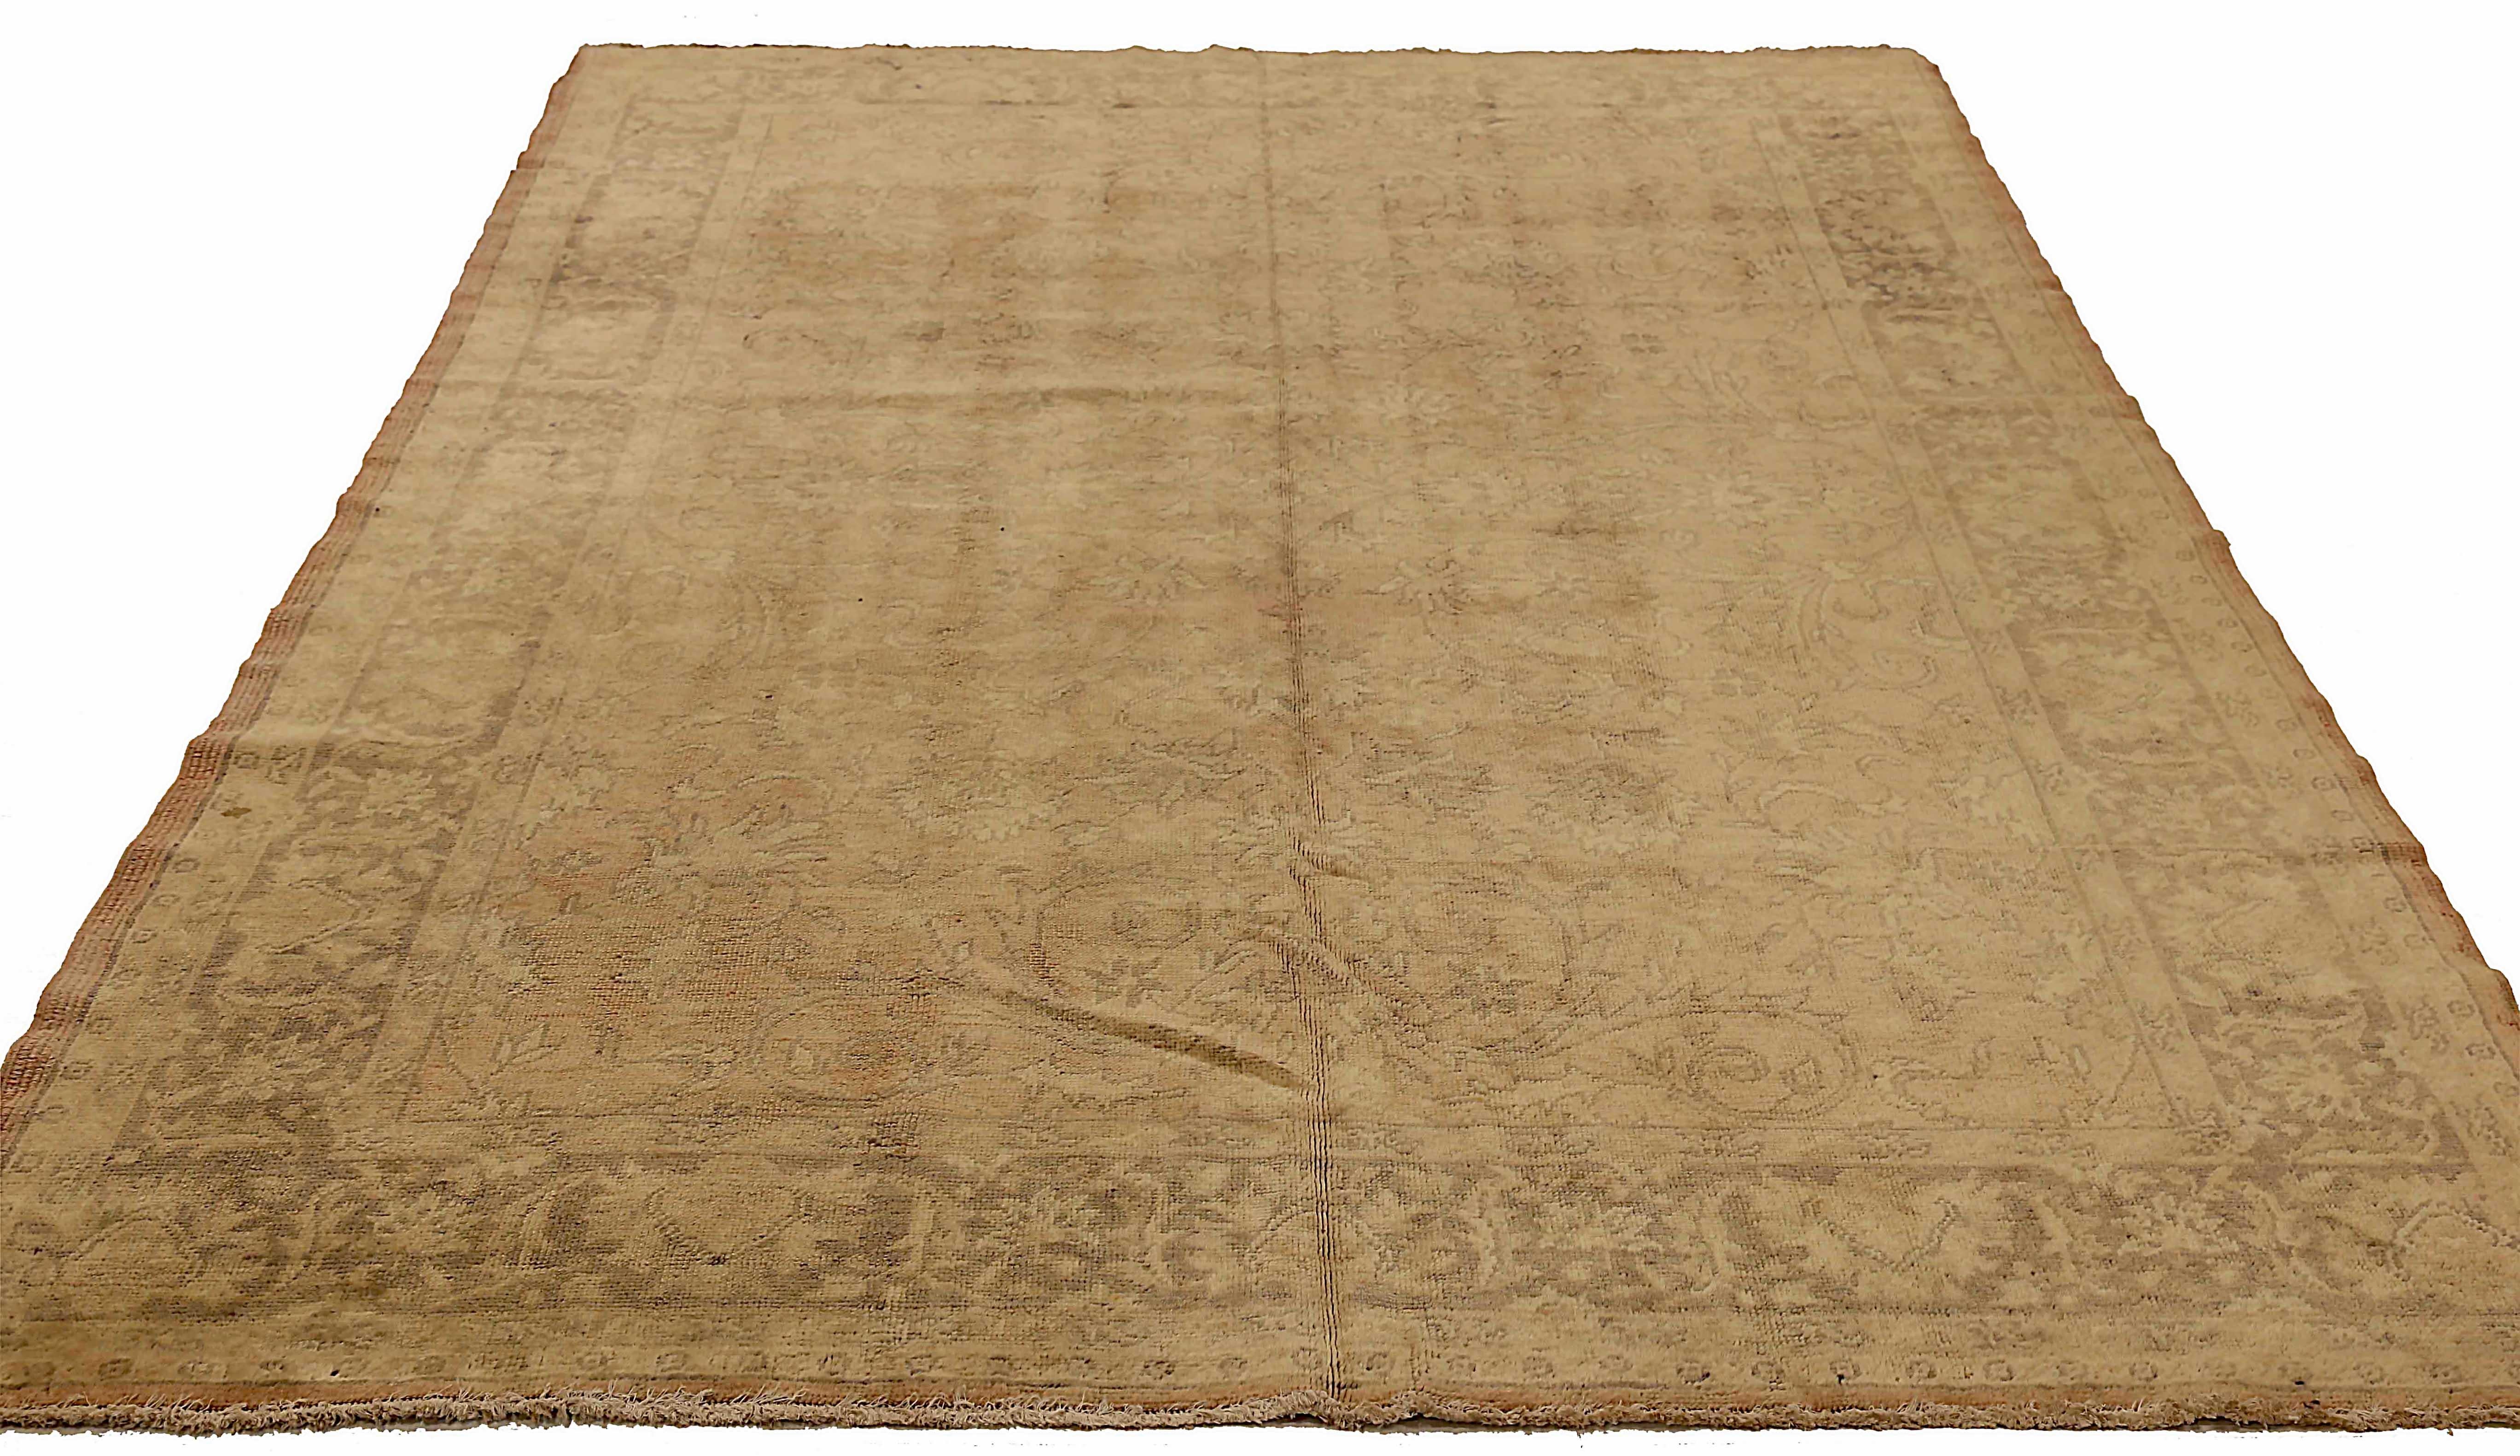 Antique Turkish area rug handwoven from the finest sheep’s wool. It’s colored with all-natural vegetable dyes that are safe for humans and pets. It’s a traditional Oushak design handwoven by expert artisans. It’s a lovely area rug that can be